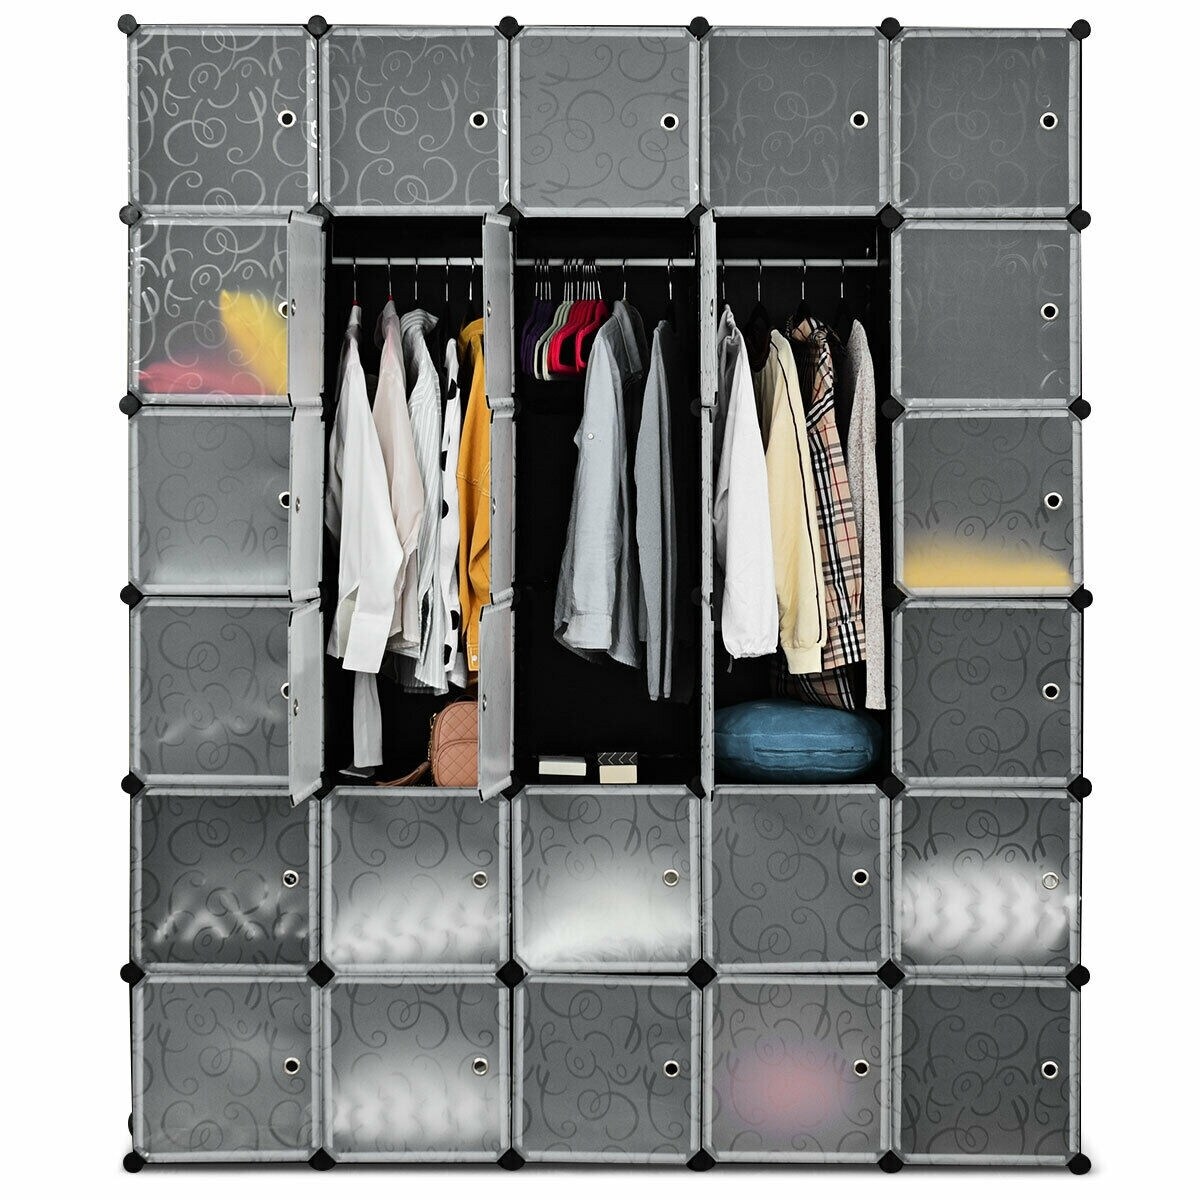 Details about   DIY Clothes Cabinet Portable Wardrobe Hanging Armoire Space Ideal Storage Cube 